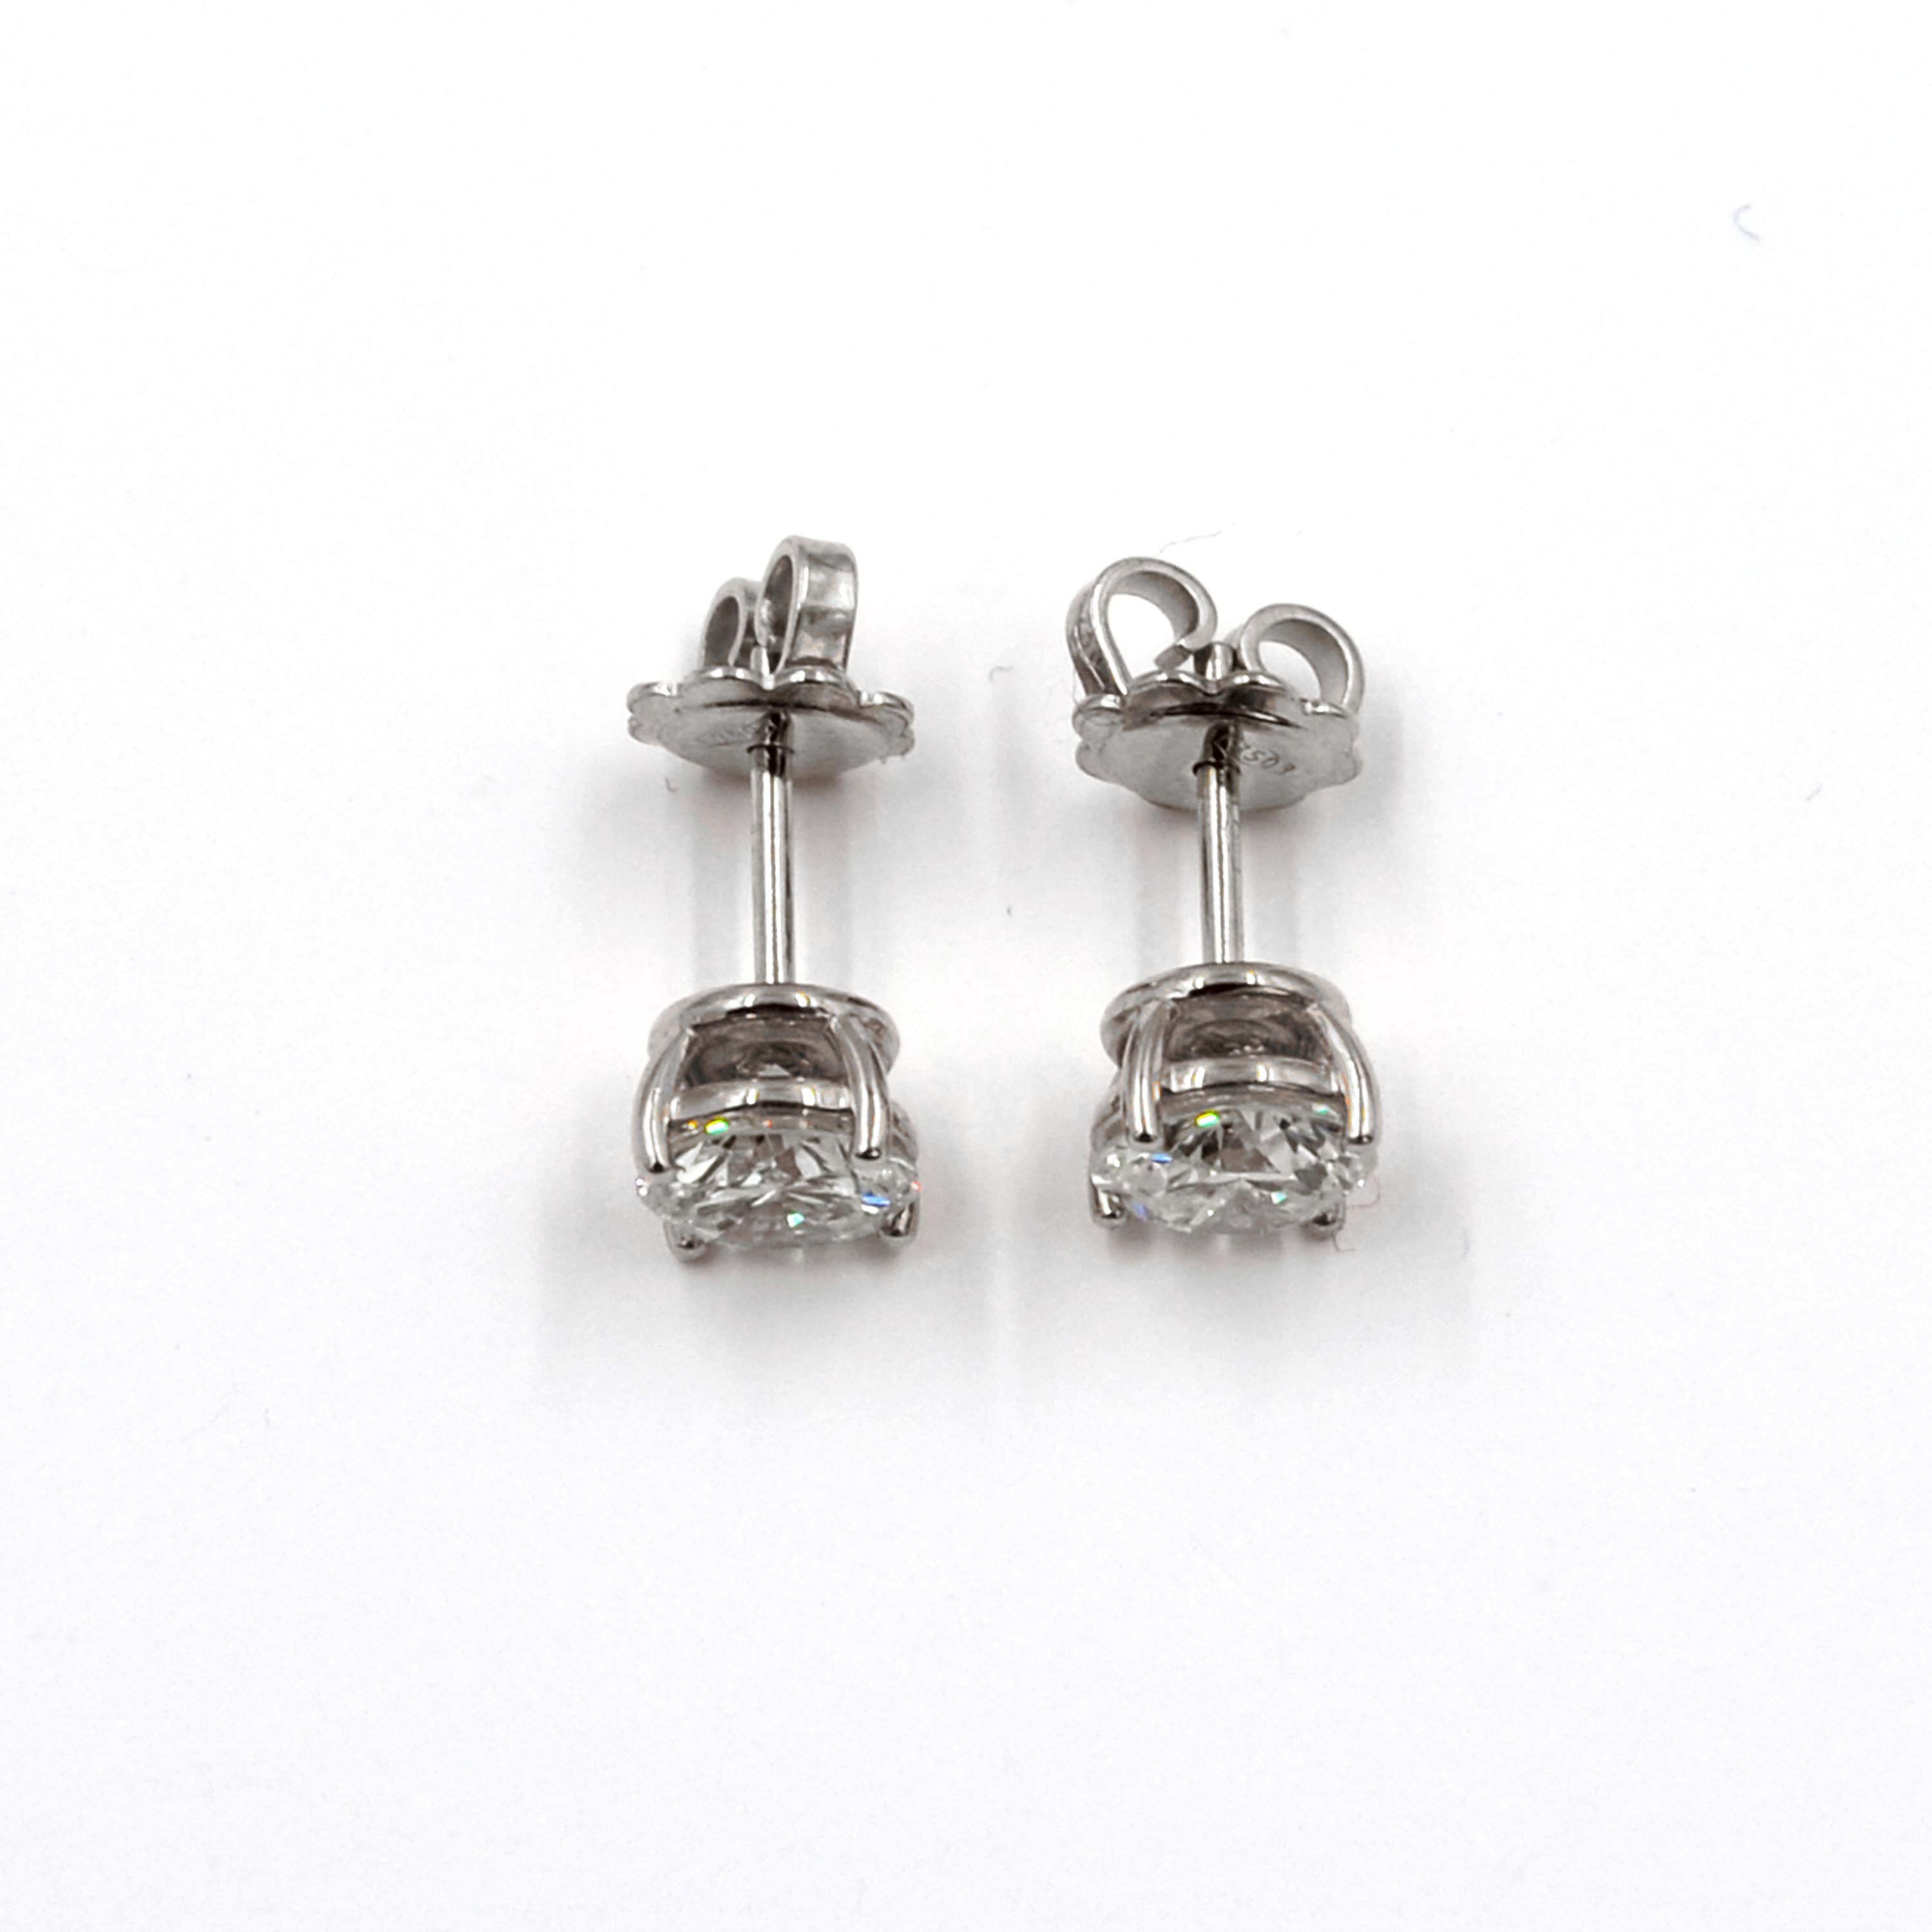 Garavelli 18kt White Gold Diamonds Stud Earrings
Diamond round stones weighting ct 1.05 and ct 1.05
Laboratory diamond verification    clarity VVS2 Color J and VVS1 color I
Made In Italy 
18kt GOLD gr  :3.00
WHITE DIAMONDS  ct 2.10 in total
Matching